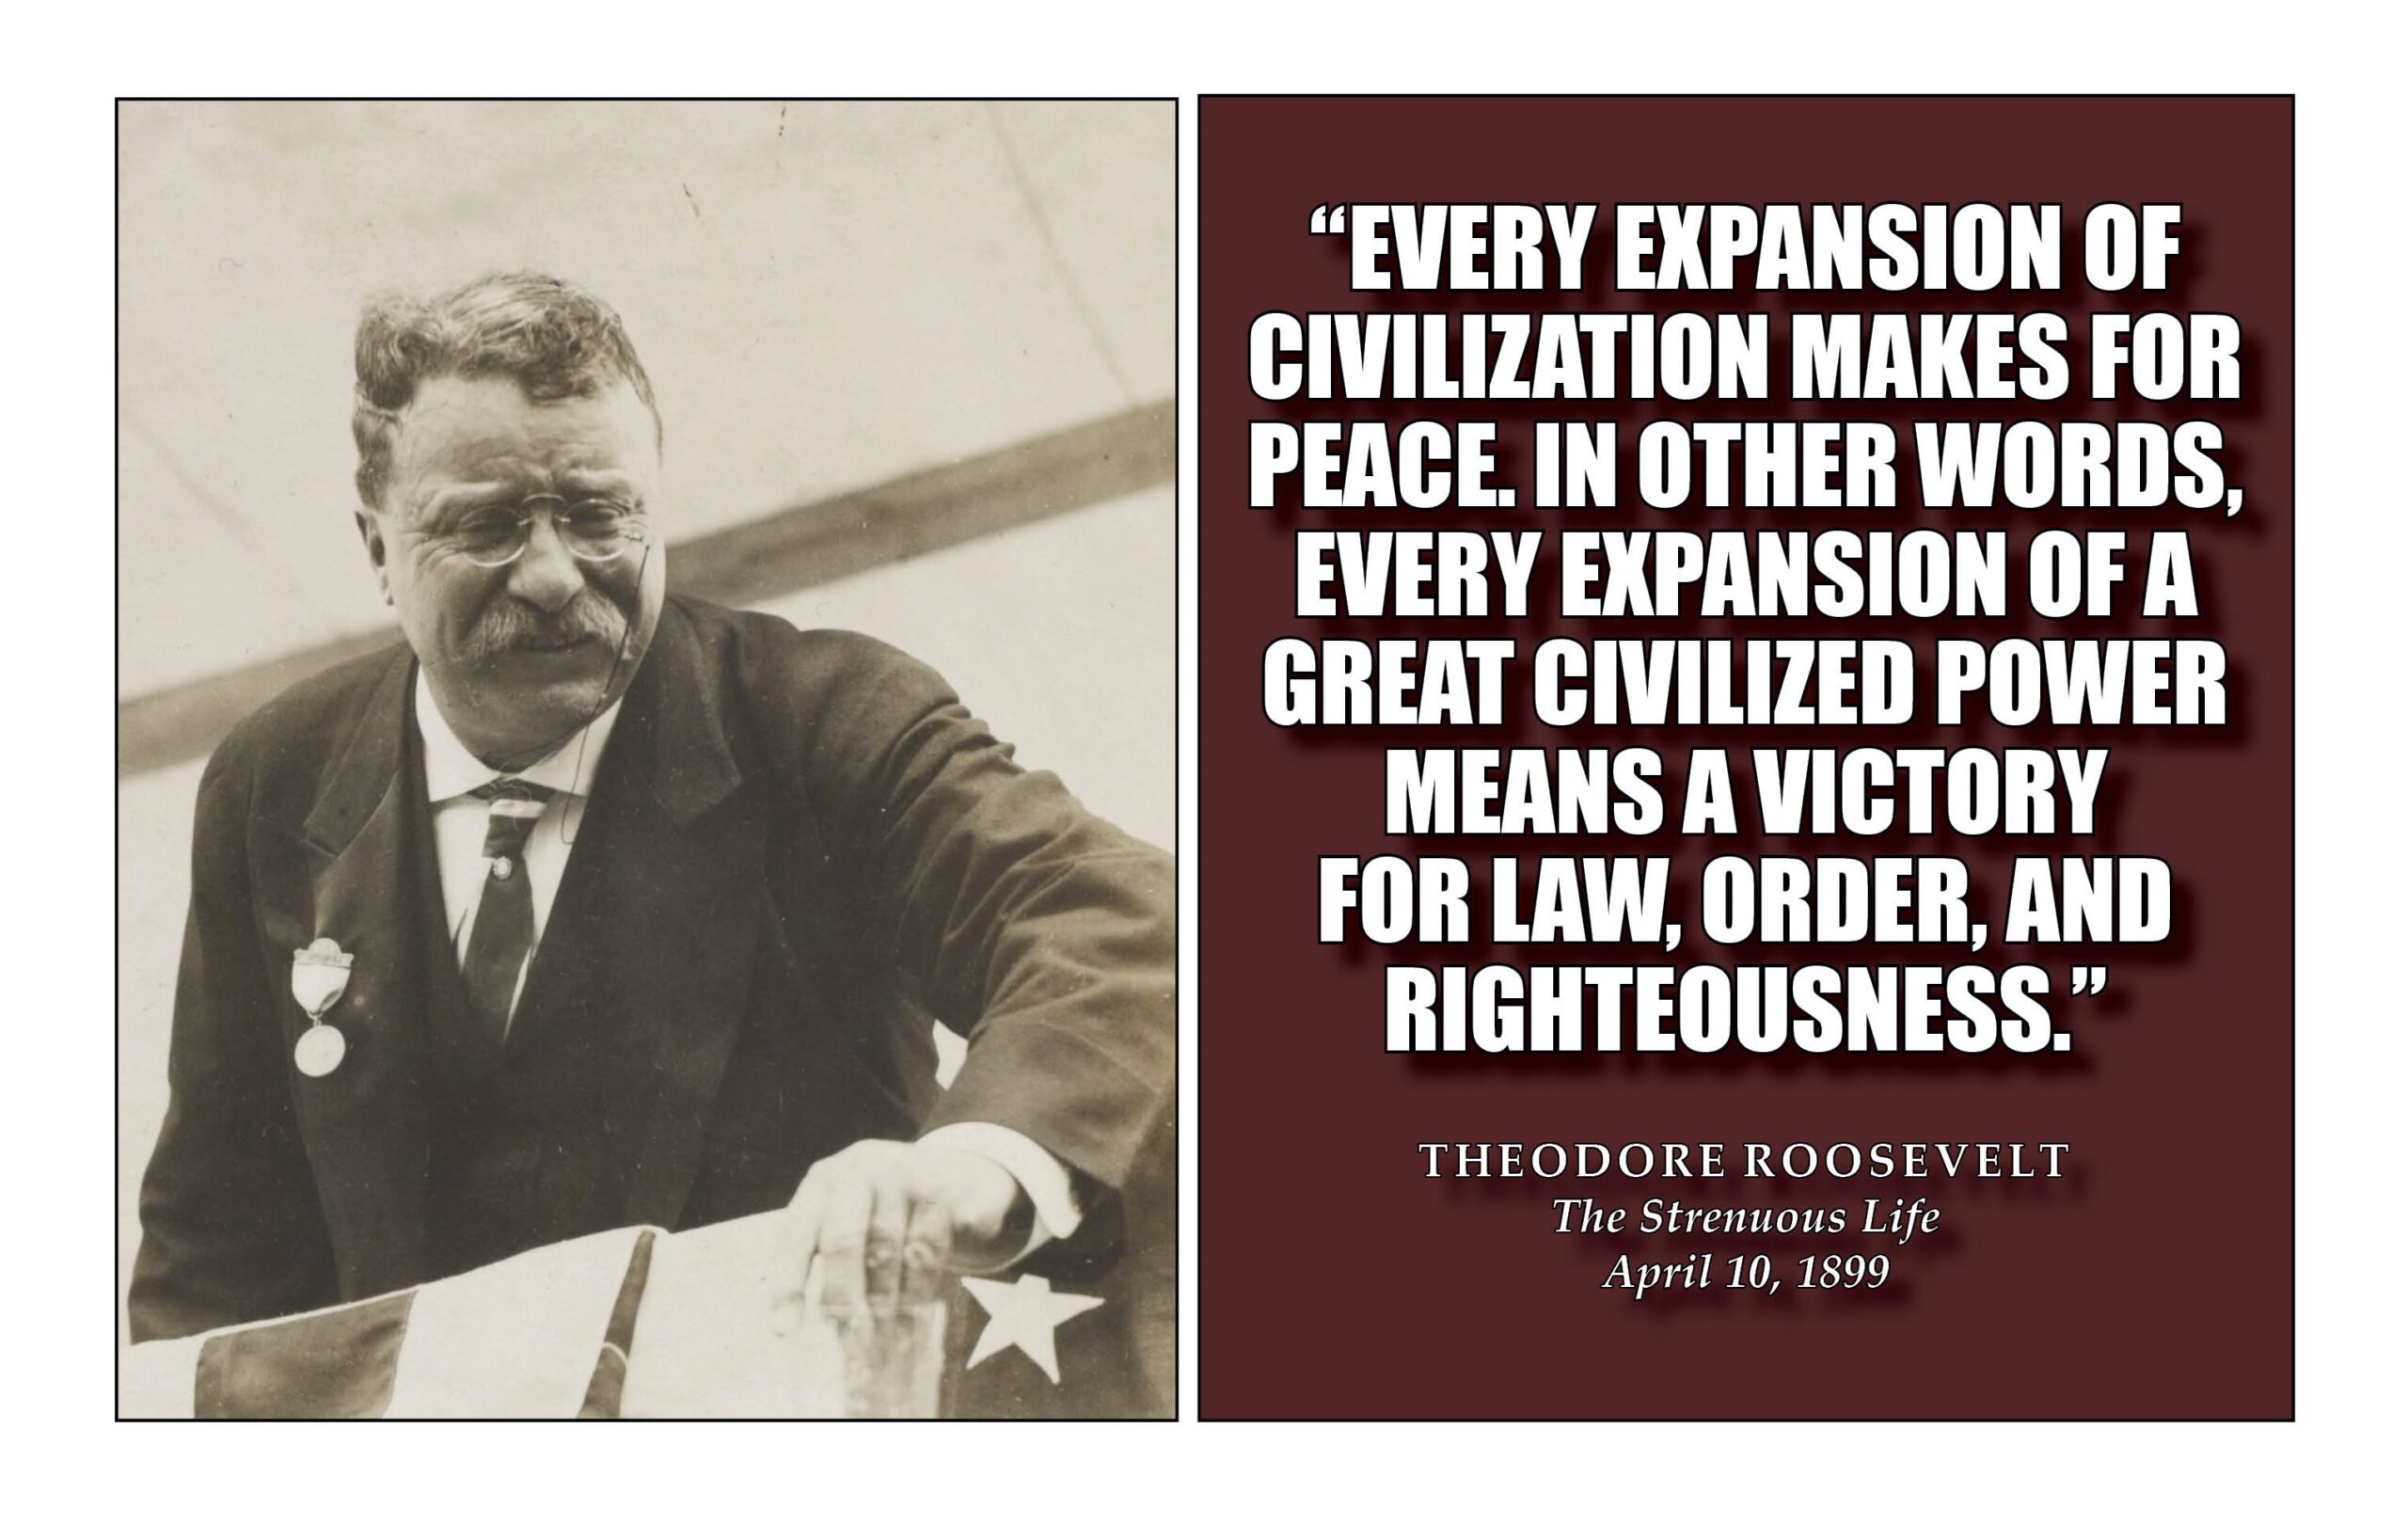 “Every expansion of civilization makes for peace. In other words, every expansion of a great civilized power means a victory for law, order, and righteousness.” Theodore Roosevelt The Strenuous Life April 10, 1899